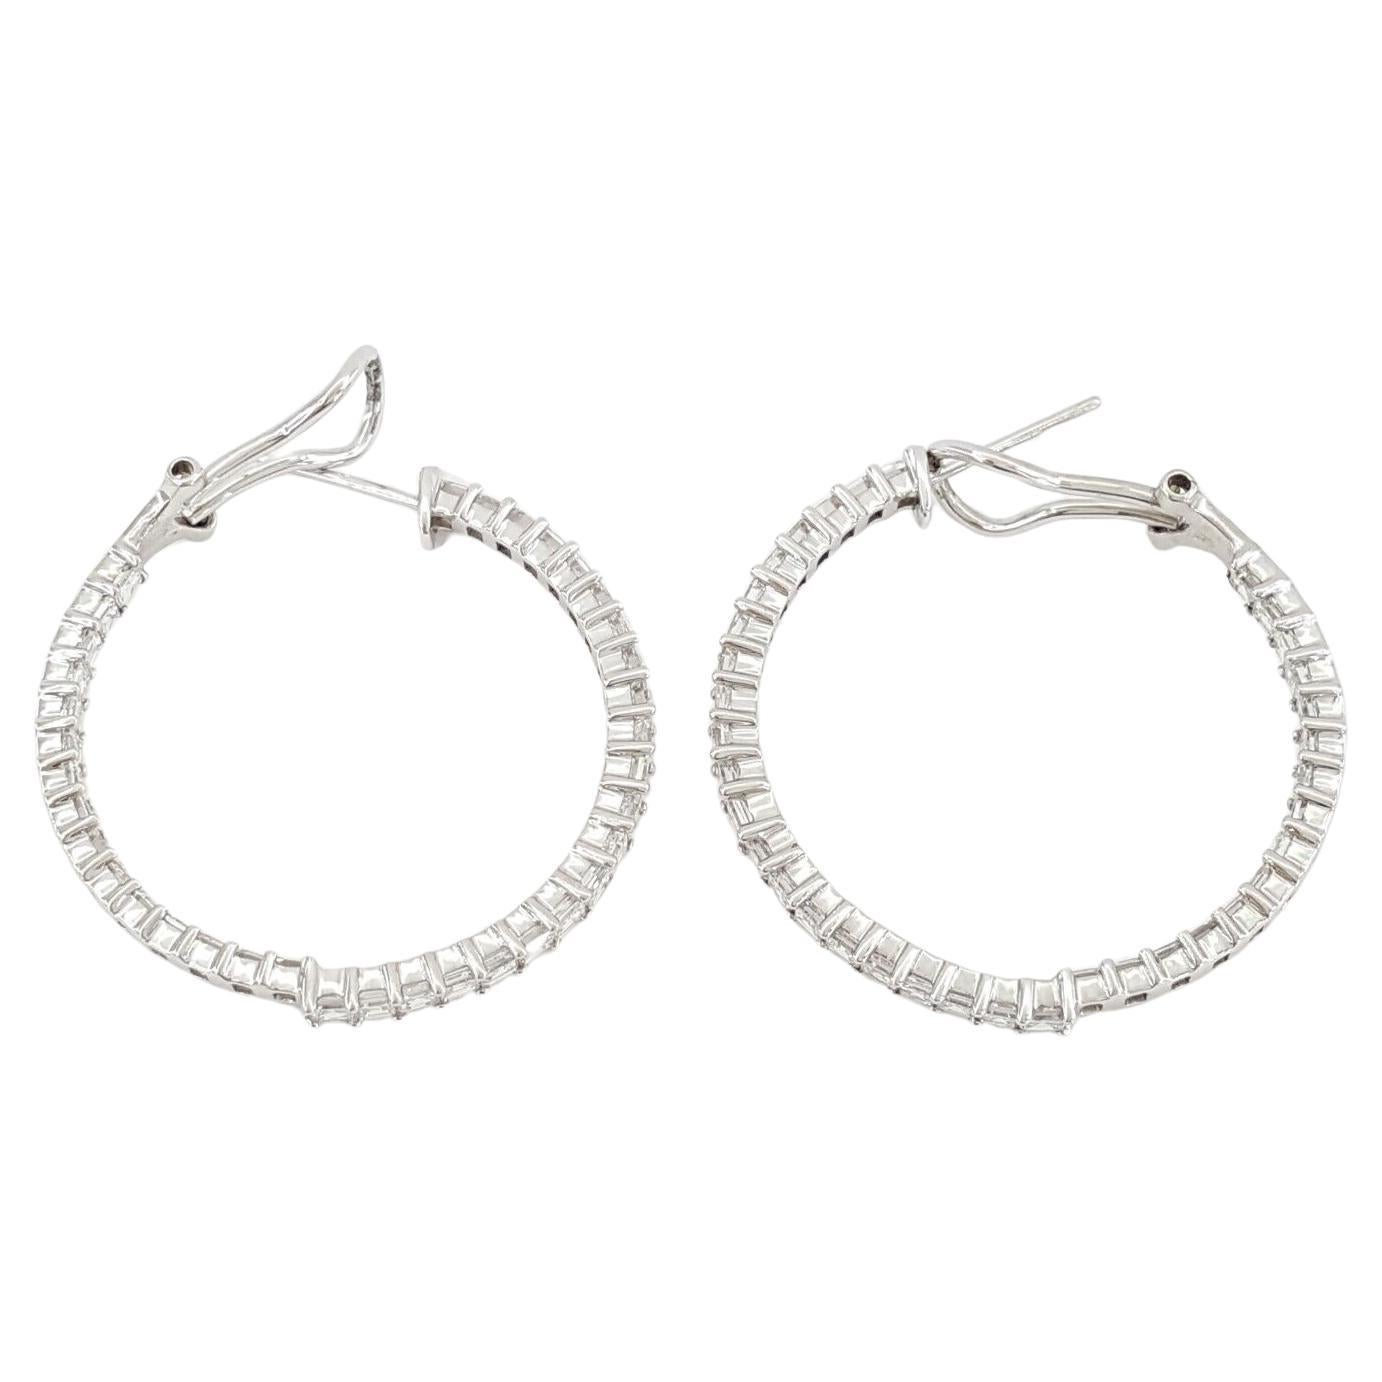 These exquisite round hoop earrings, marked 'ODELIA 585' on the inside, showcase the epitome of luxury and craftsmanship. Each earring is adorned with 36 Natural Square Carre Cut Diamonds, totaling 72 for the pair, which collectively weigh